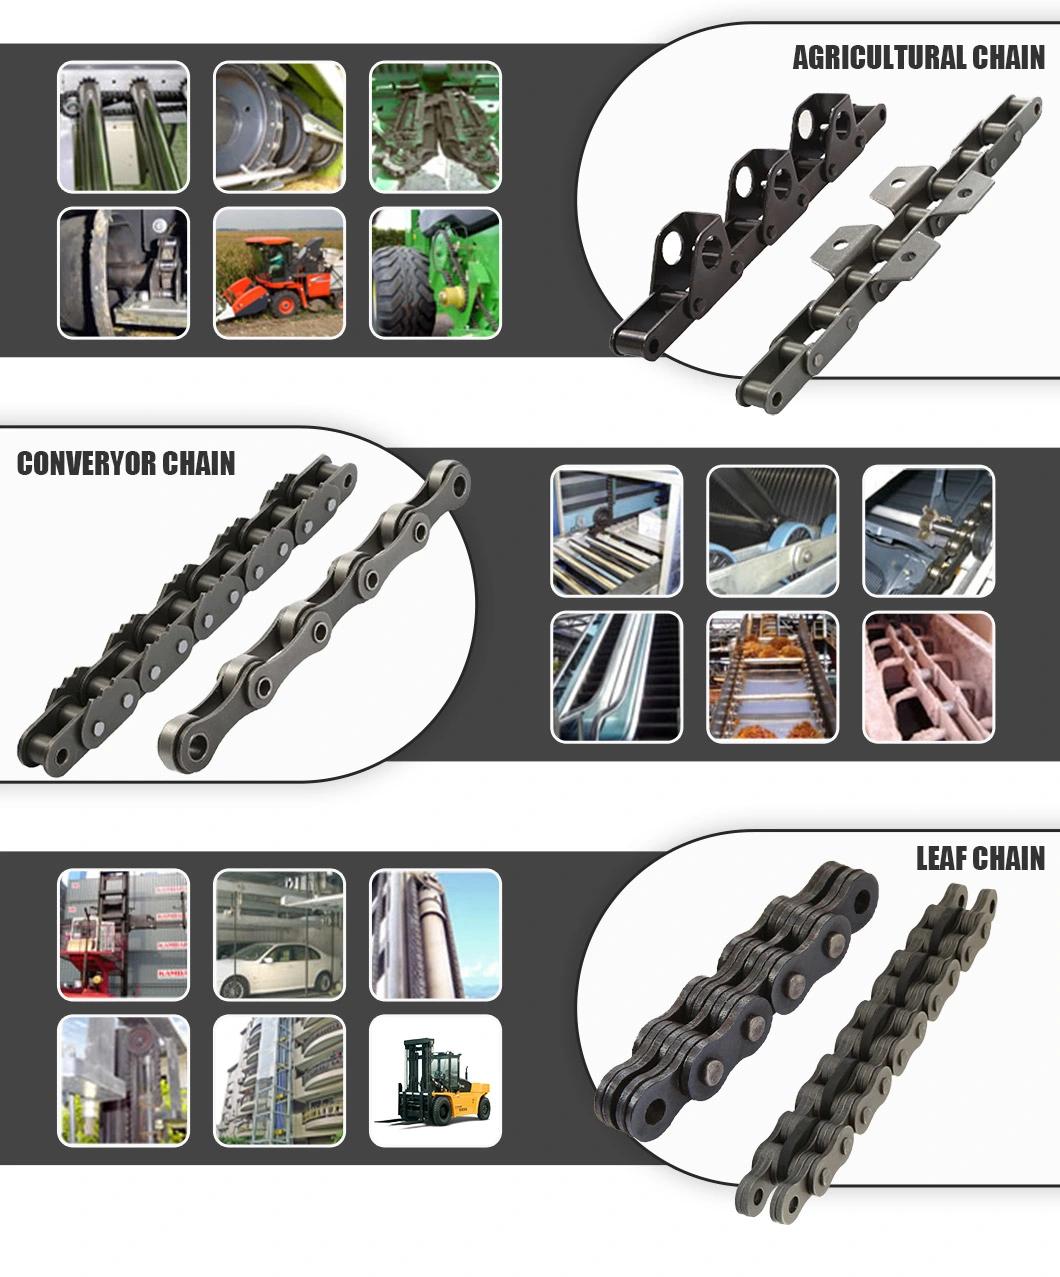 a Type Steel Agricultural Chain